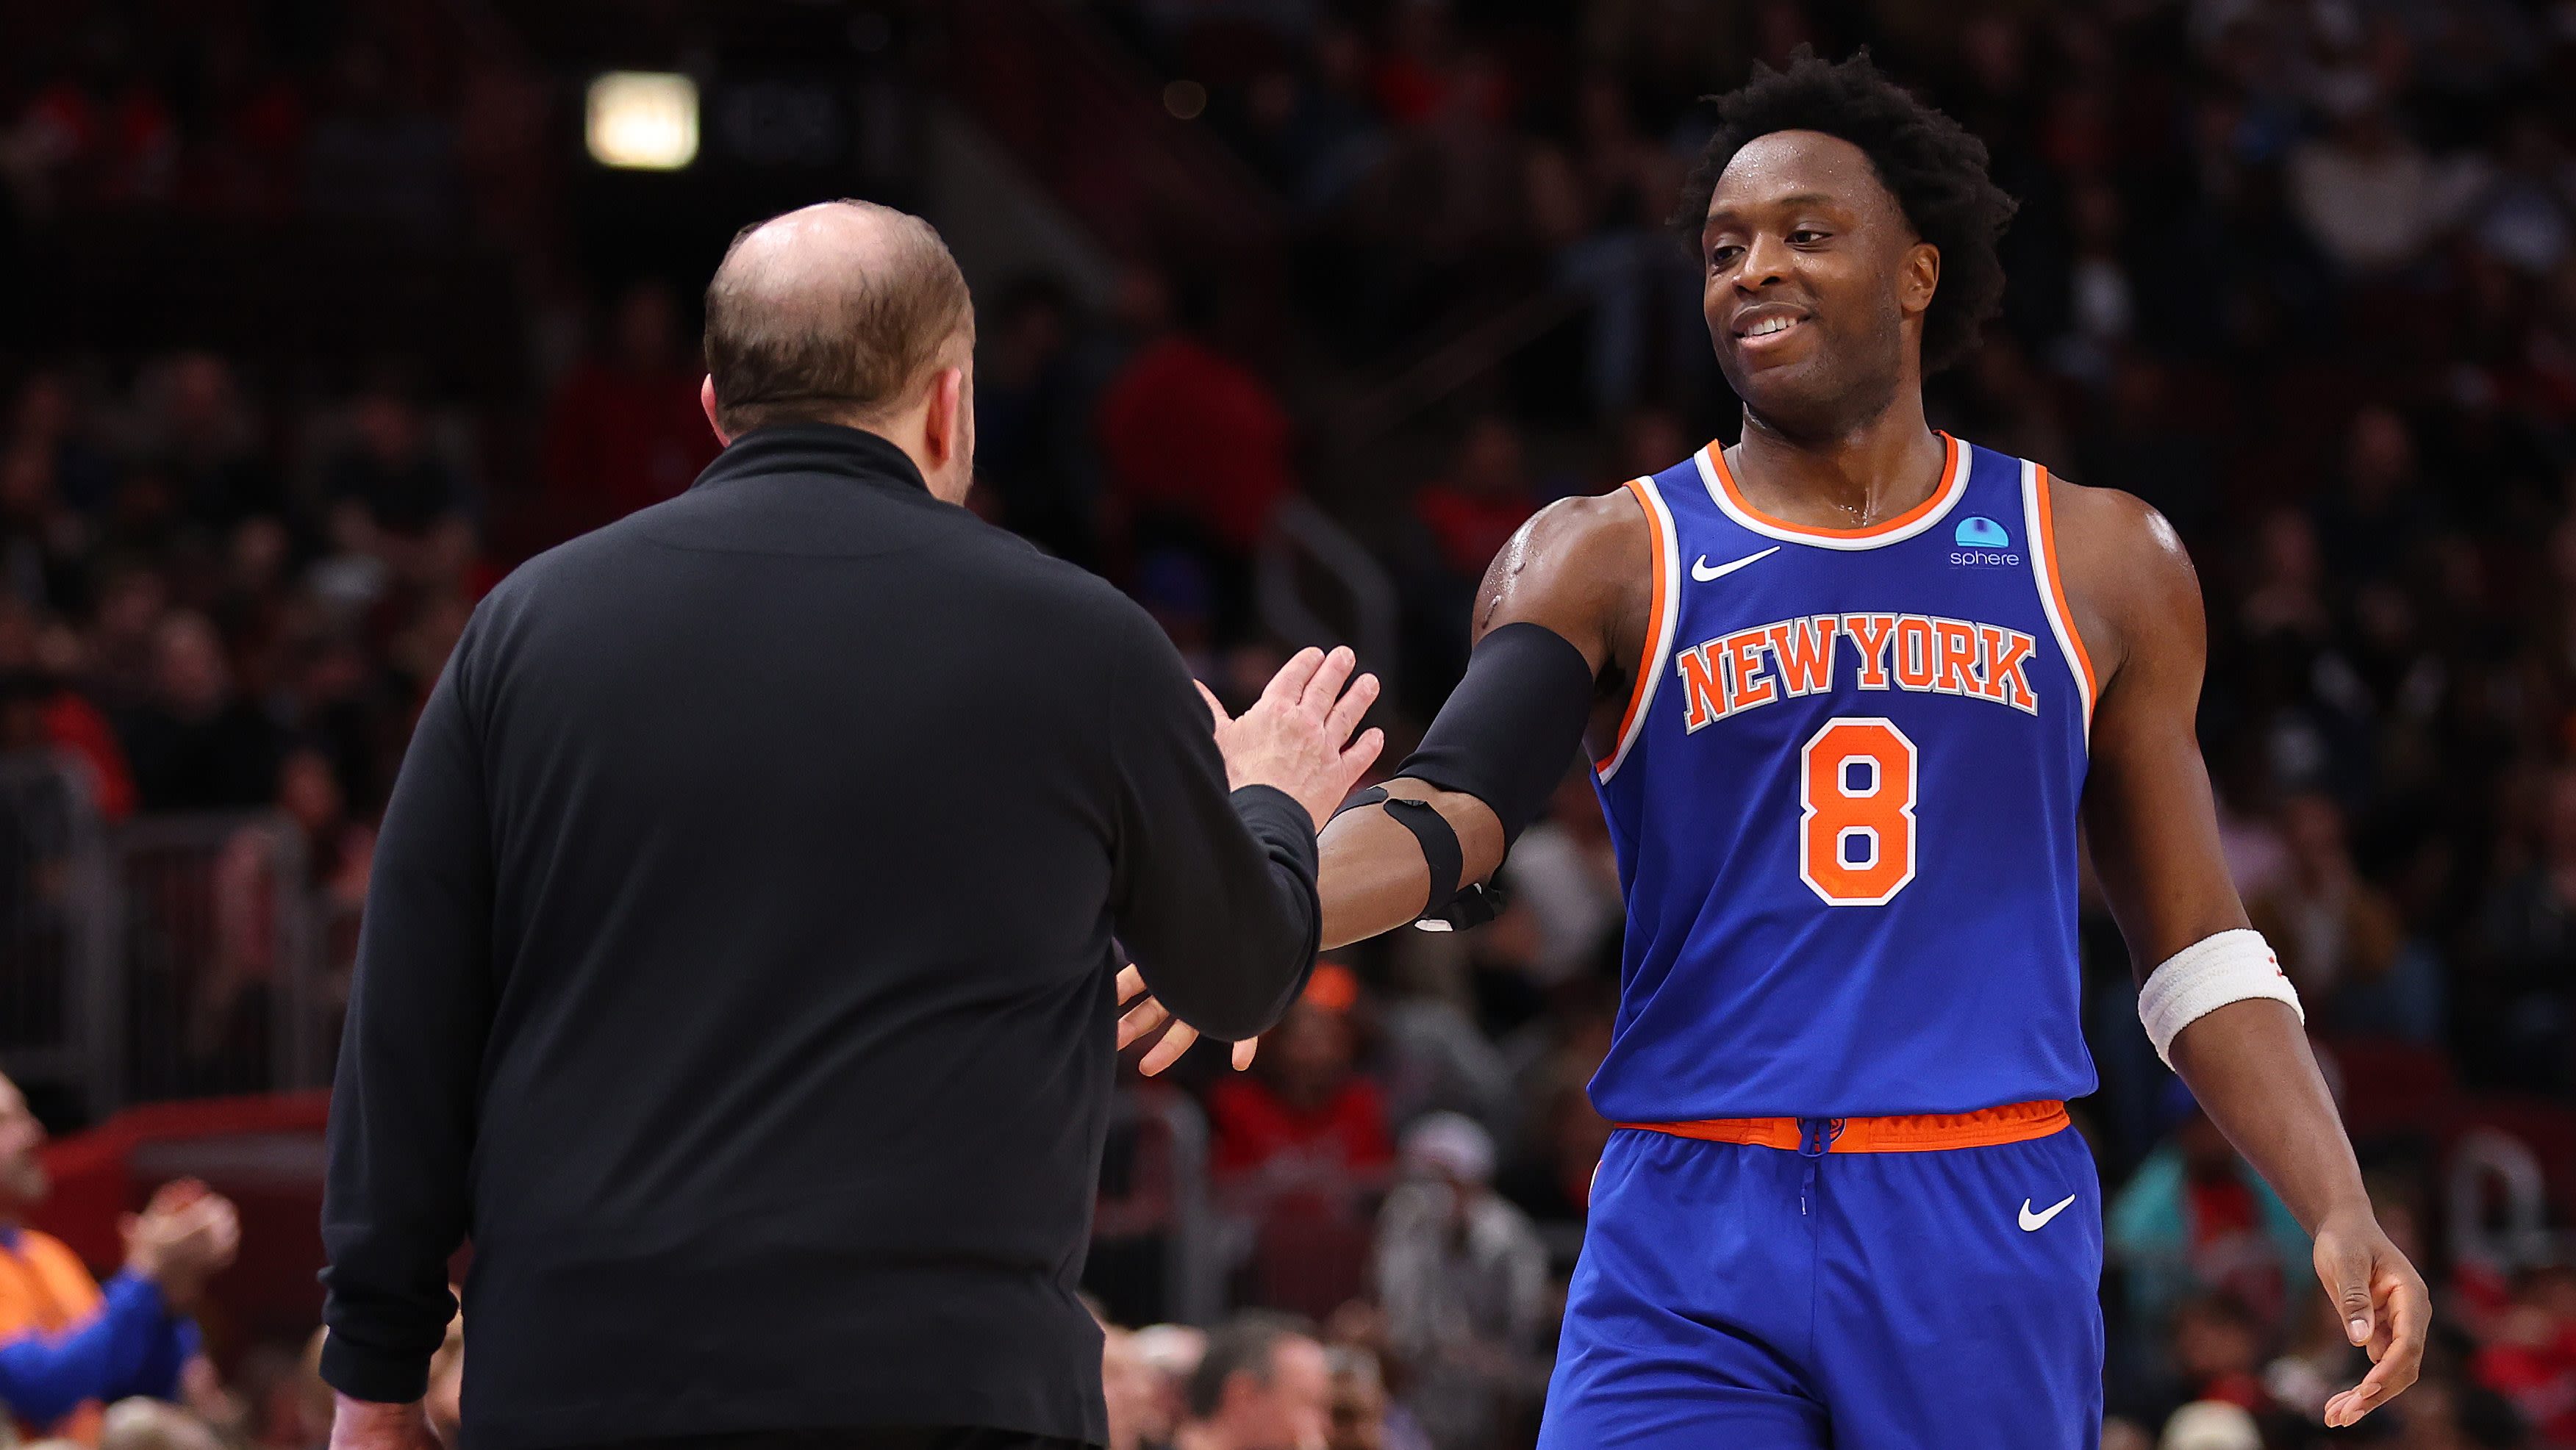 Tom Thibodeau Offers 3 Words on OG Anunoby’s Game 7 Status for Knicks